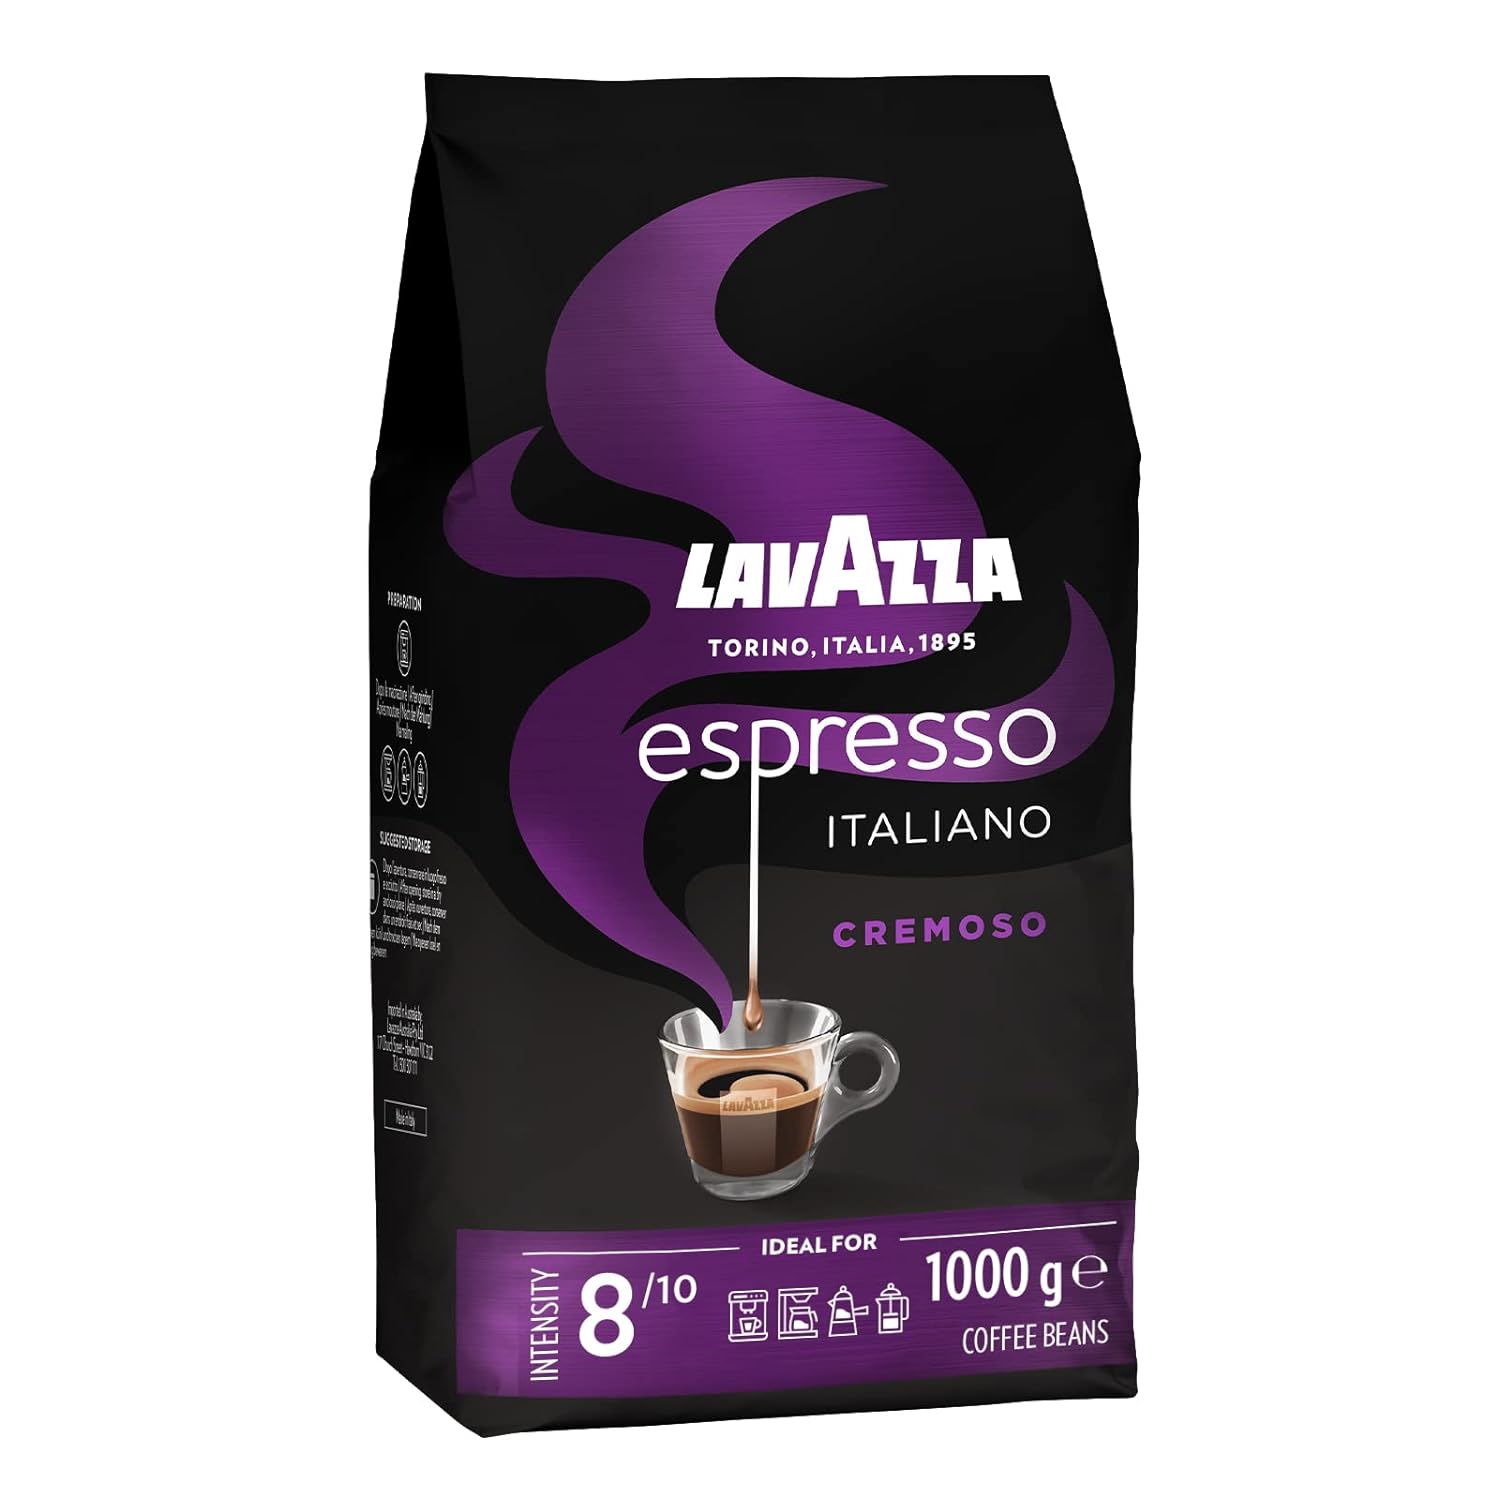 Lavazza, Espresso Italiano Cremoso, Arabica and Robusta Coffee beans, with aromanops of spices and cocoa, intensity 8/10, medium roasting, 1 pack with 1 kg